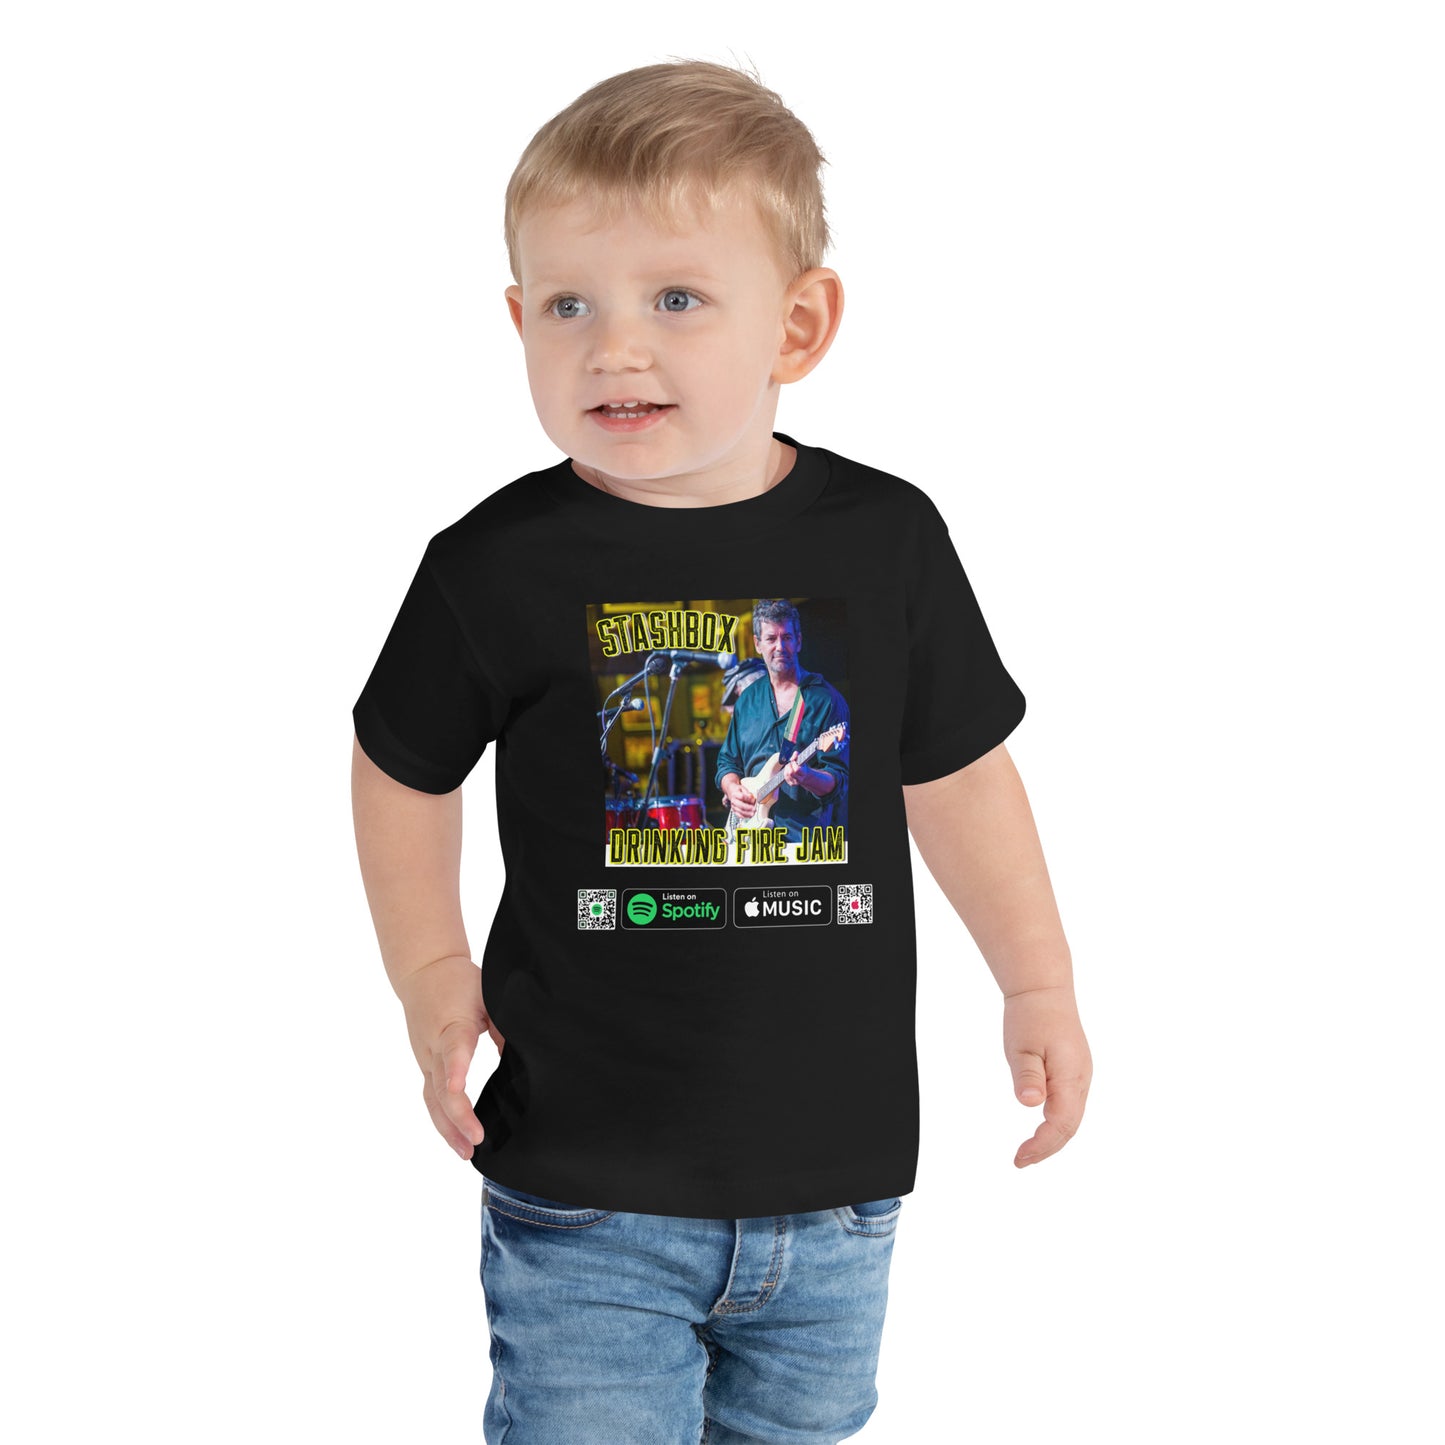 Rock the toddler fashion game with our Drinking Fire Toddler Short Sleeve Tee. Stashbox Design #004. Style, comfort, and musical vibes, curated by Stashbox.ai.